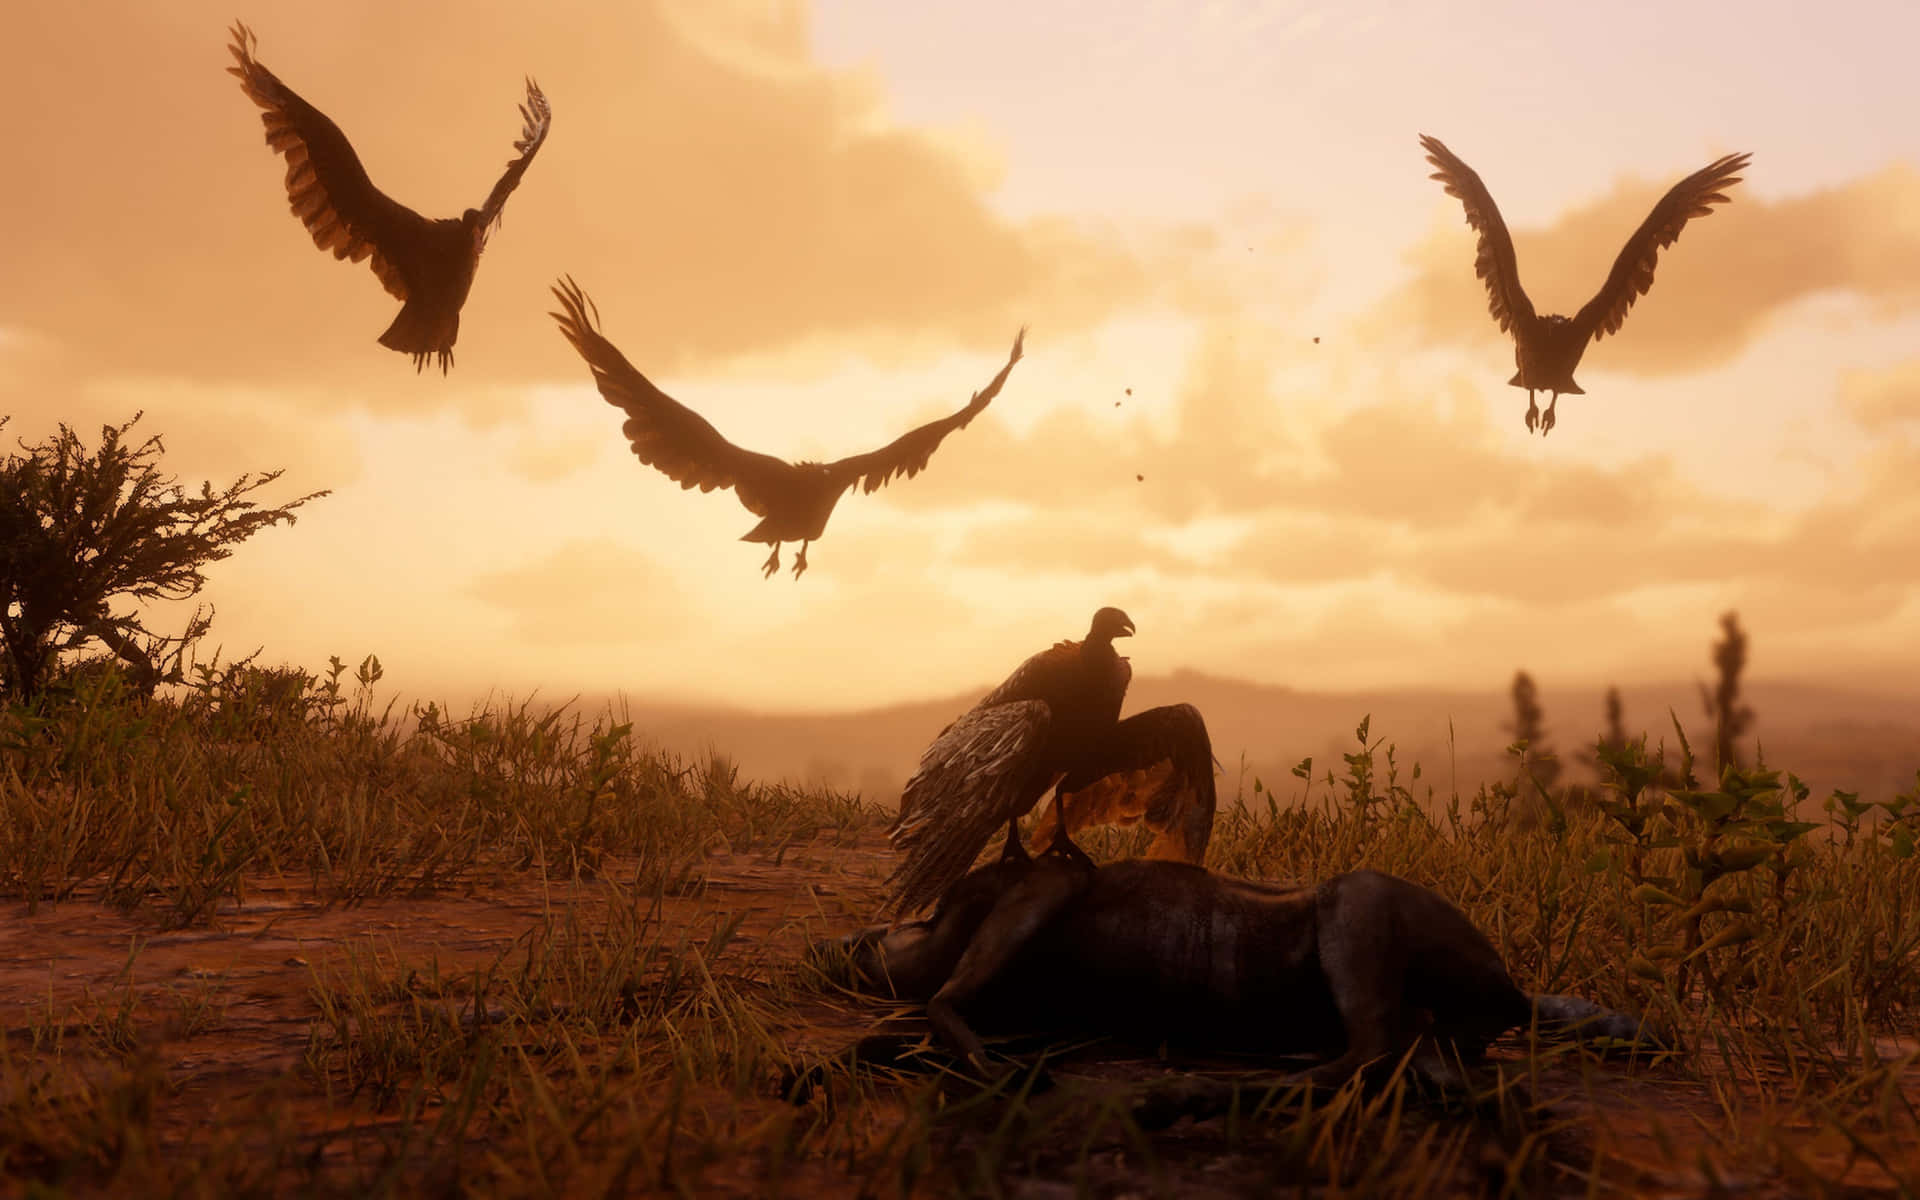 Best Red Dead Redemption 2 Vultures Feasting On A Dead Dog Background